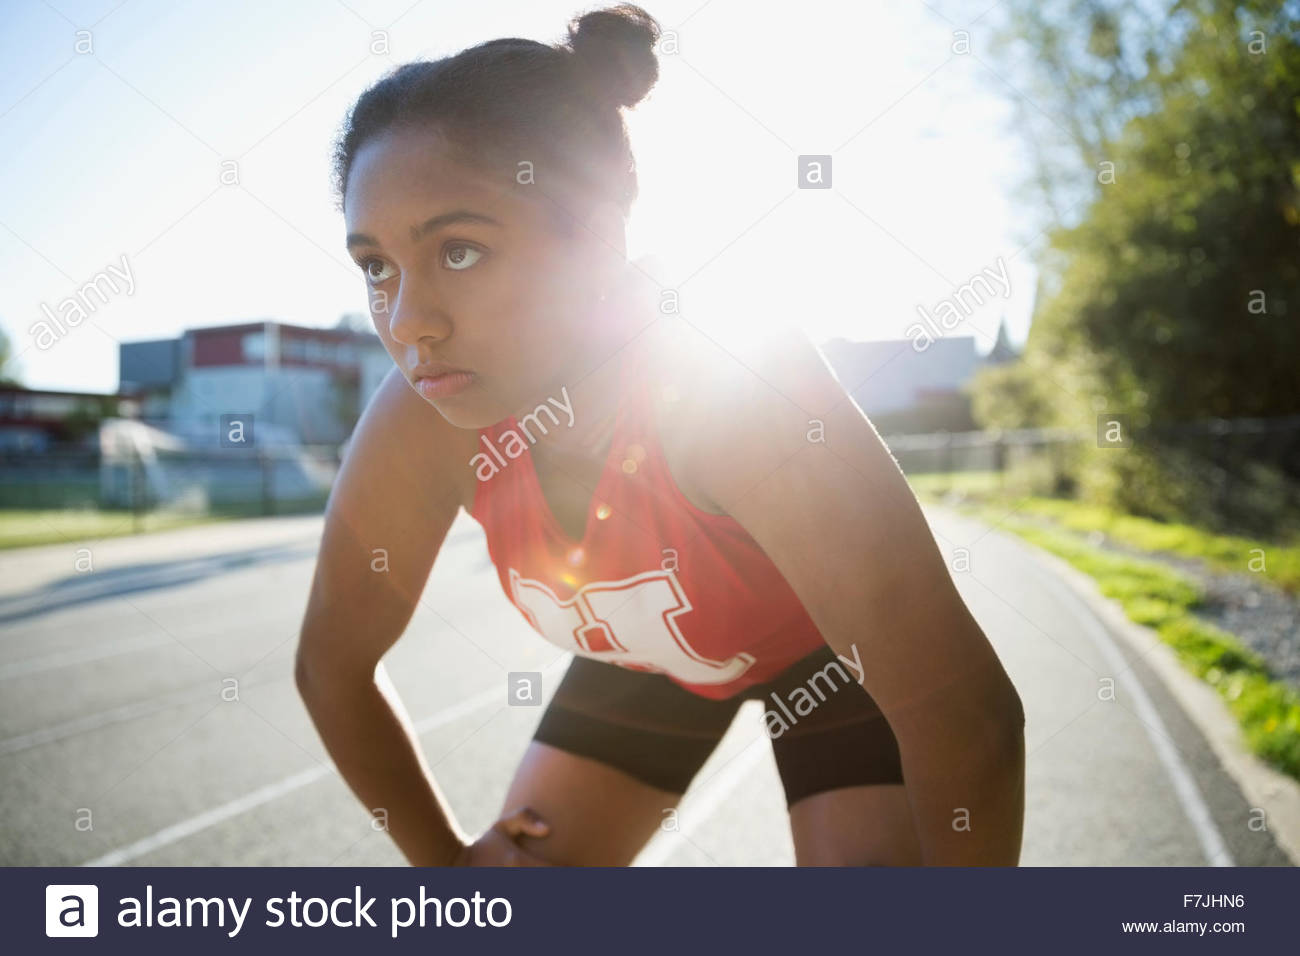 Serious high school athlete hands knees running track Stock Photo